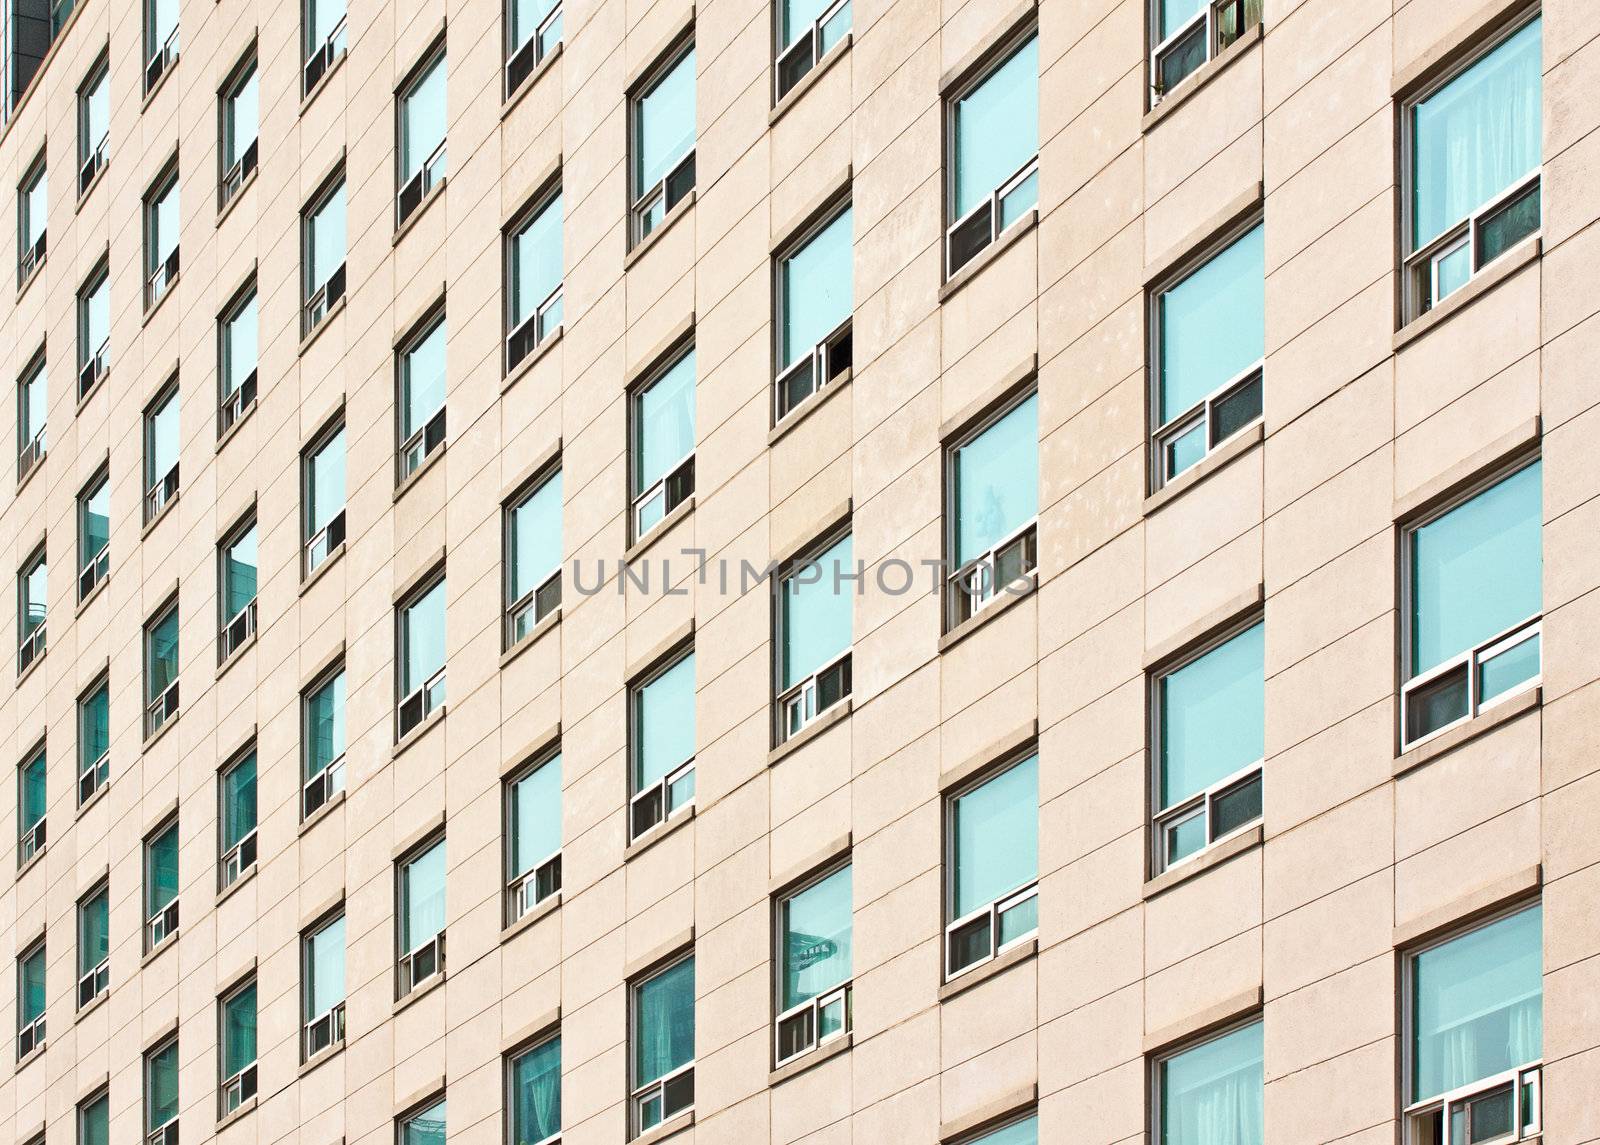 Apartment building with many windows at a university campus